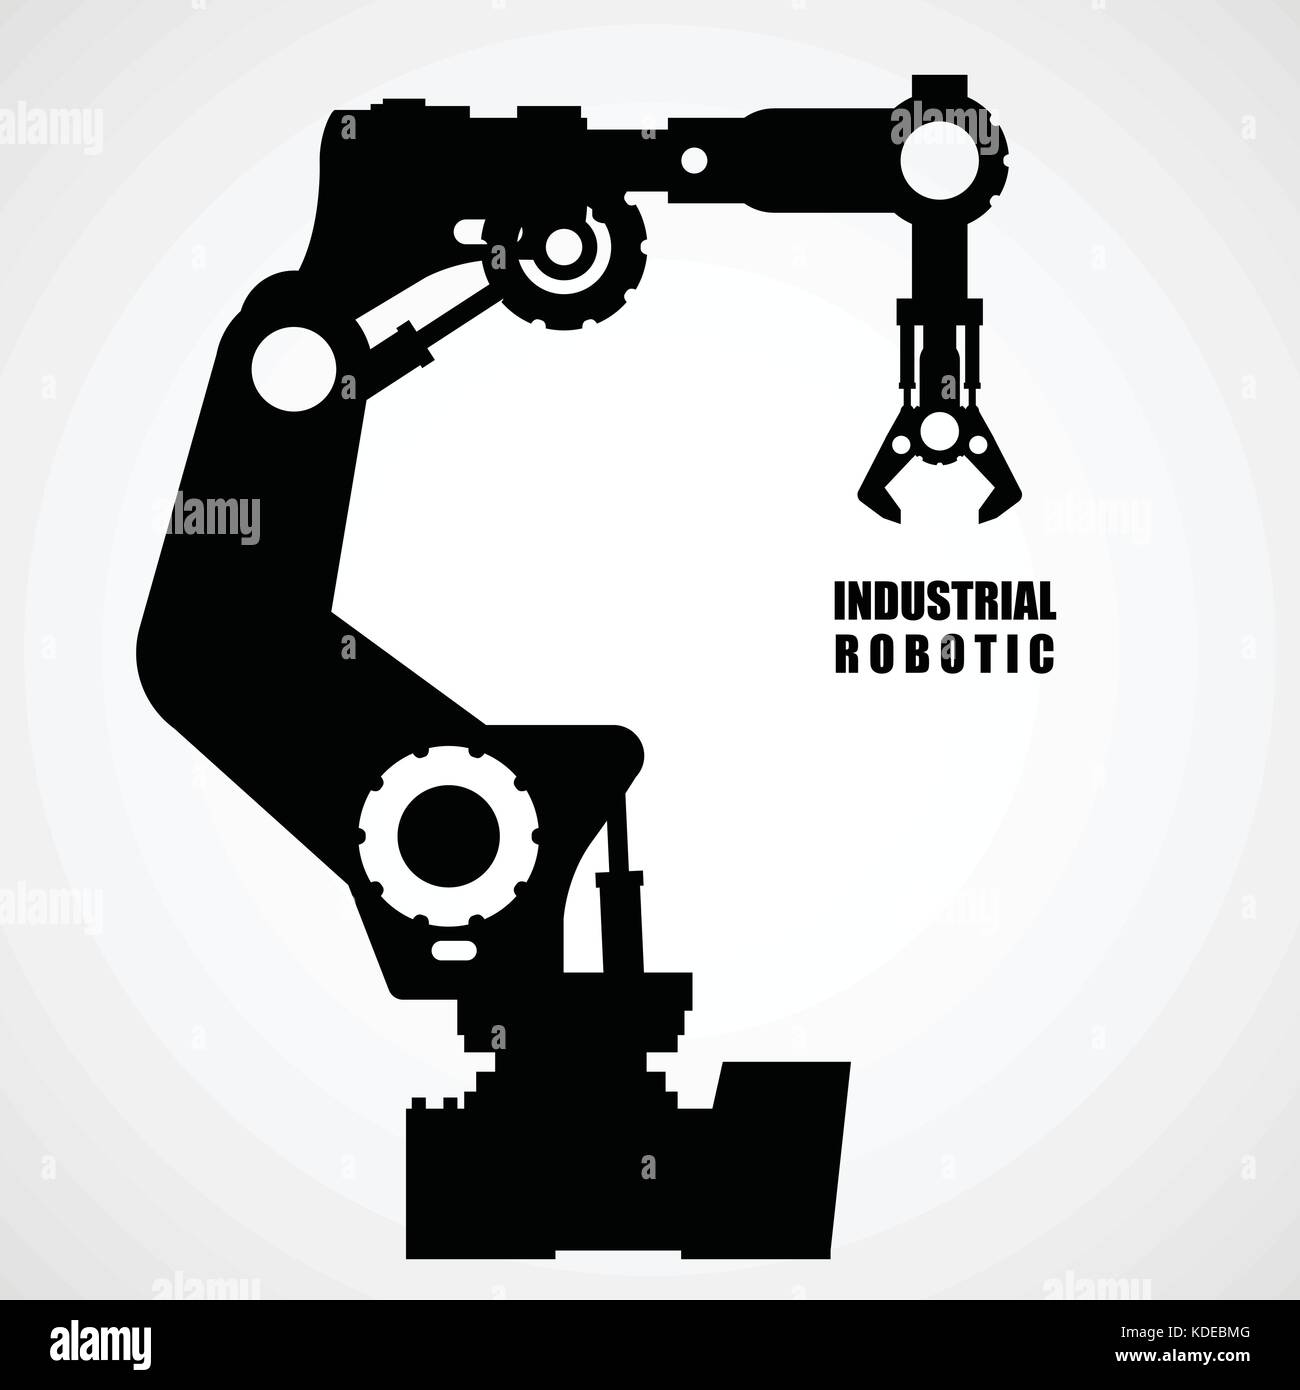 Industrial robotics - production line machinery silhouette Stock Vector